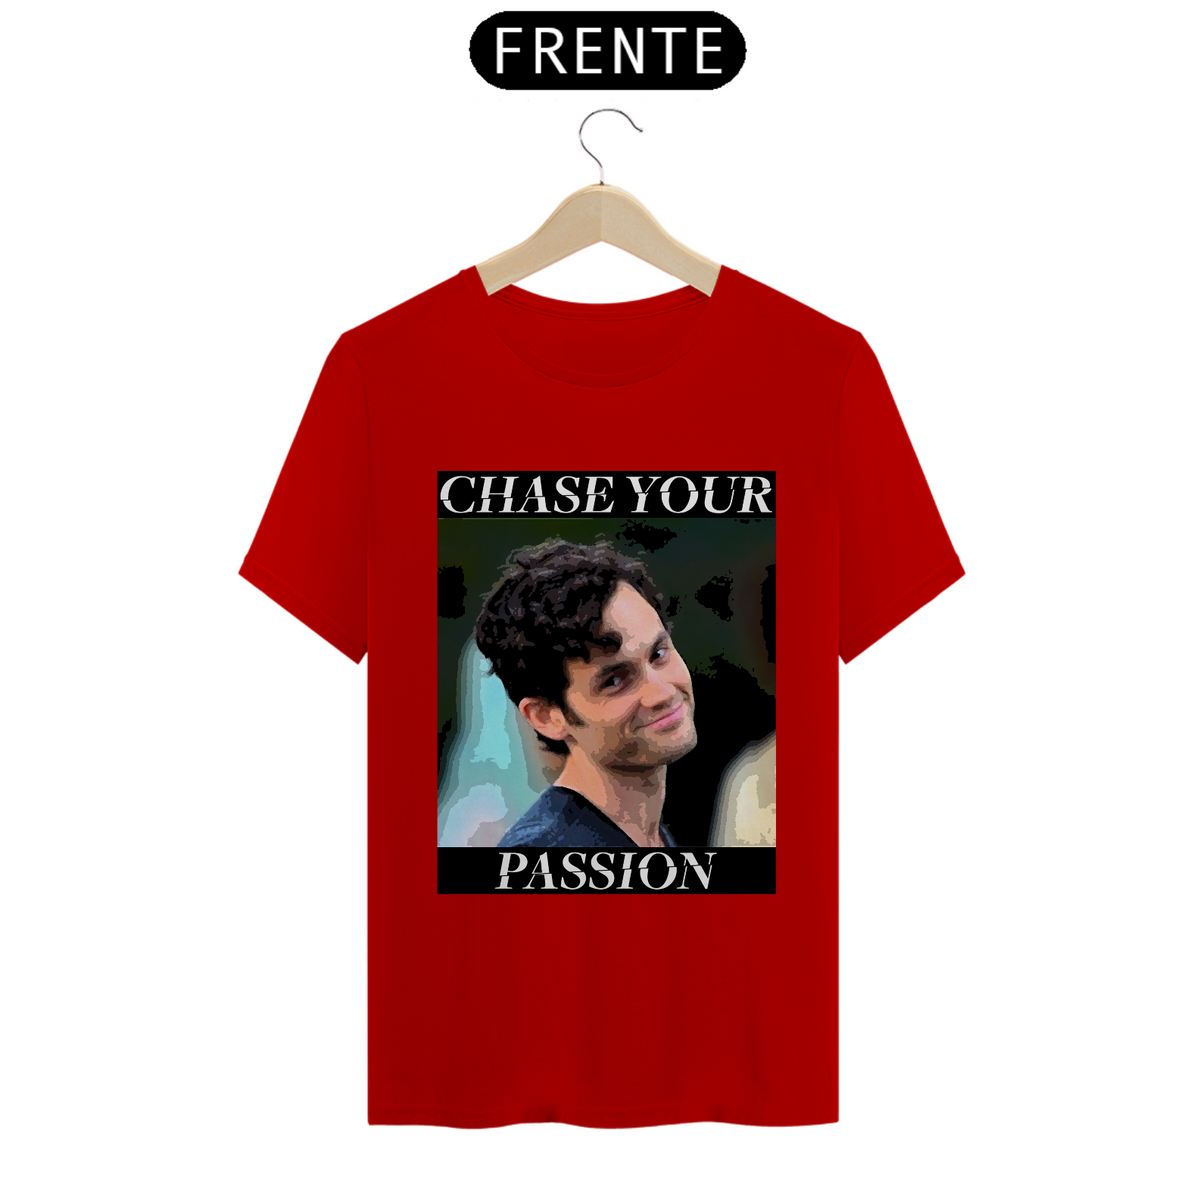 Nome do produto: Chase Your Passion - T-Shirt